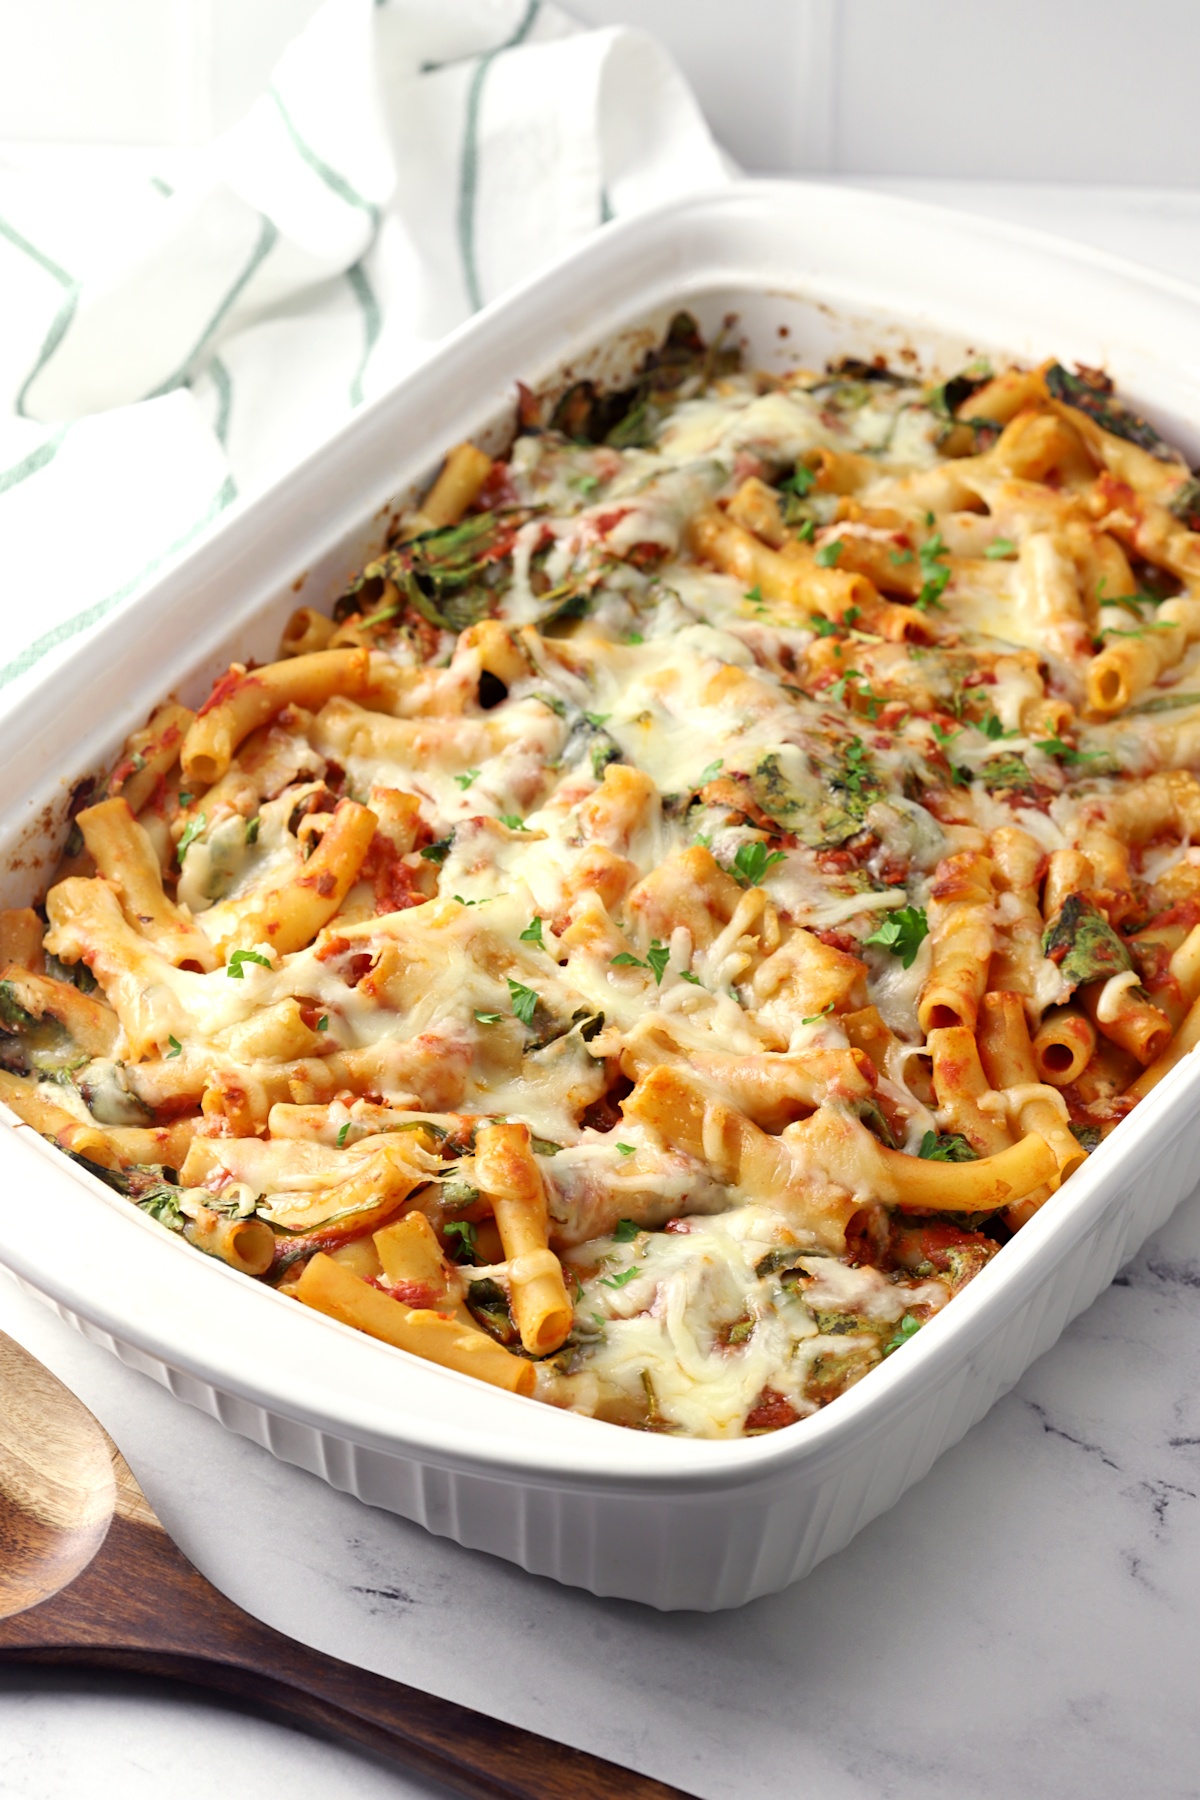 A white casserole dish filled with pasta, tomato sauce, spinach, and cheese.